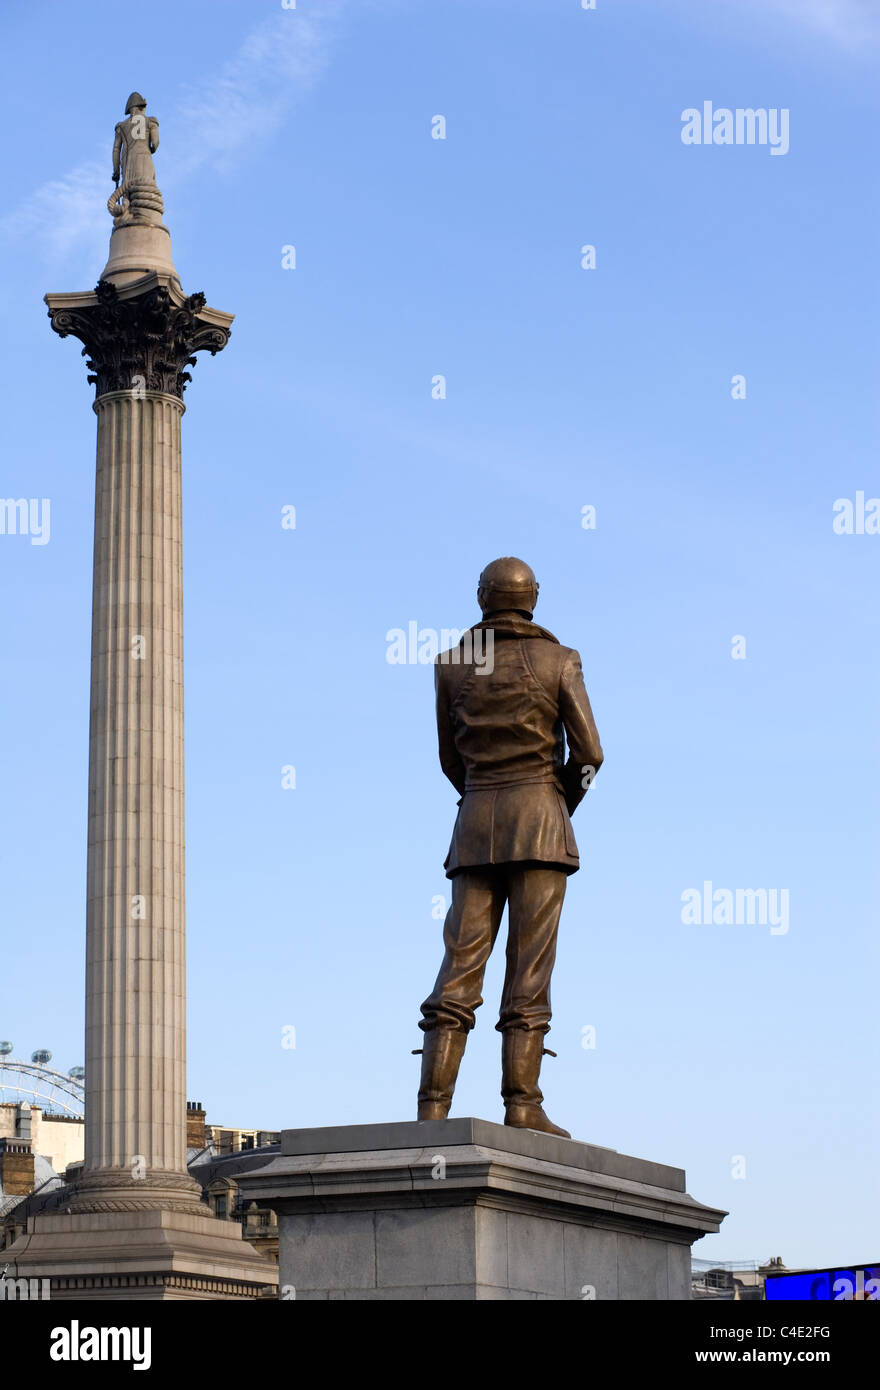 Statues Sir Keith Park by Les Johnson and Lord Nelson,Trafalgar Square, London, England, UK, Europe Stock Photo